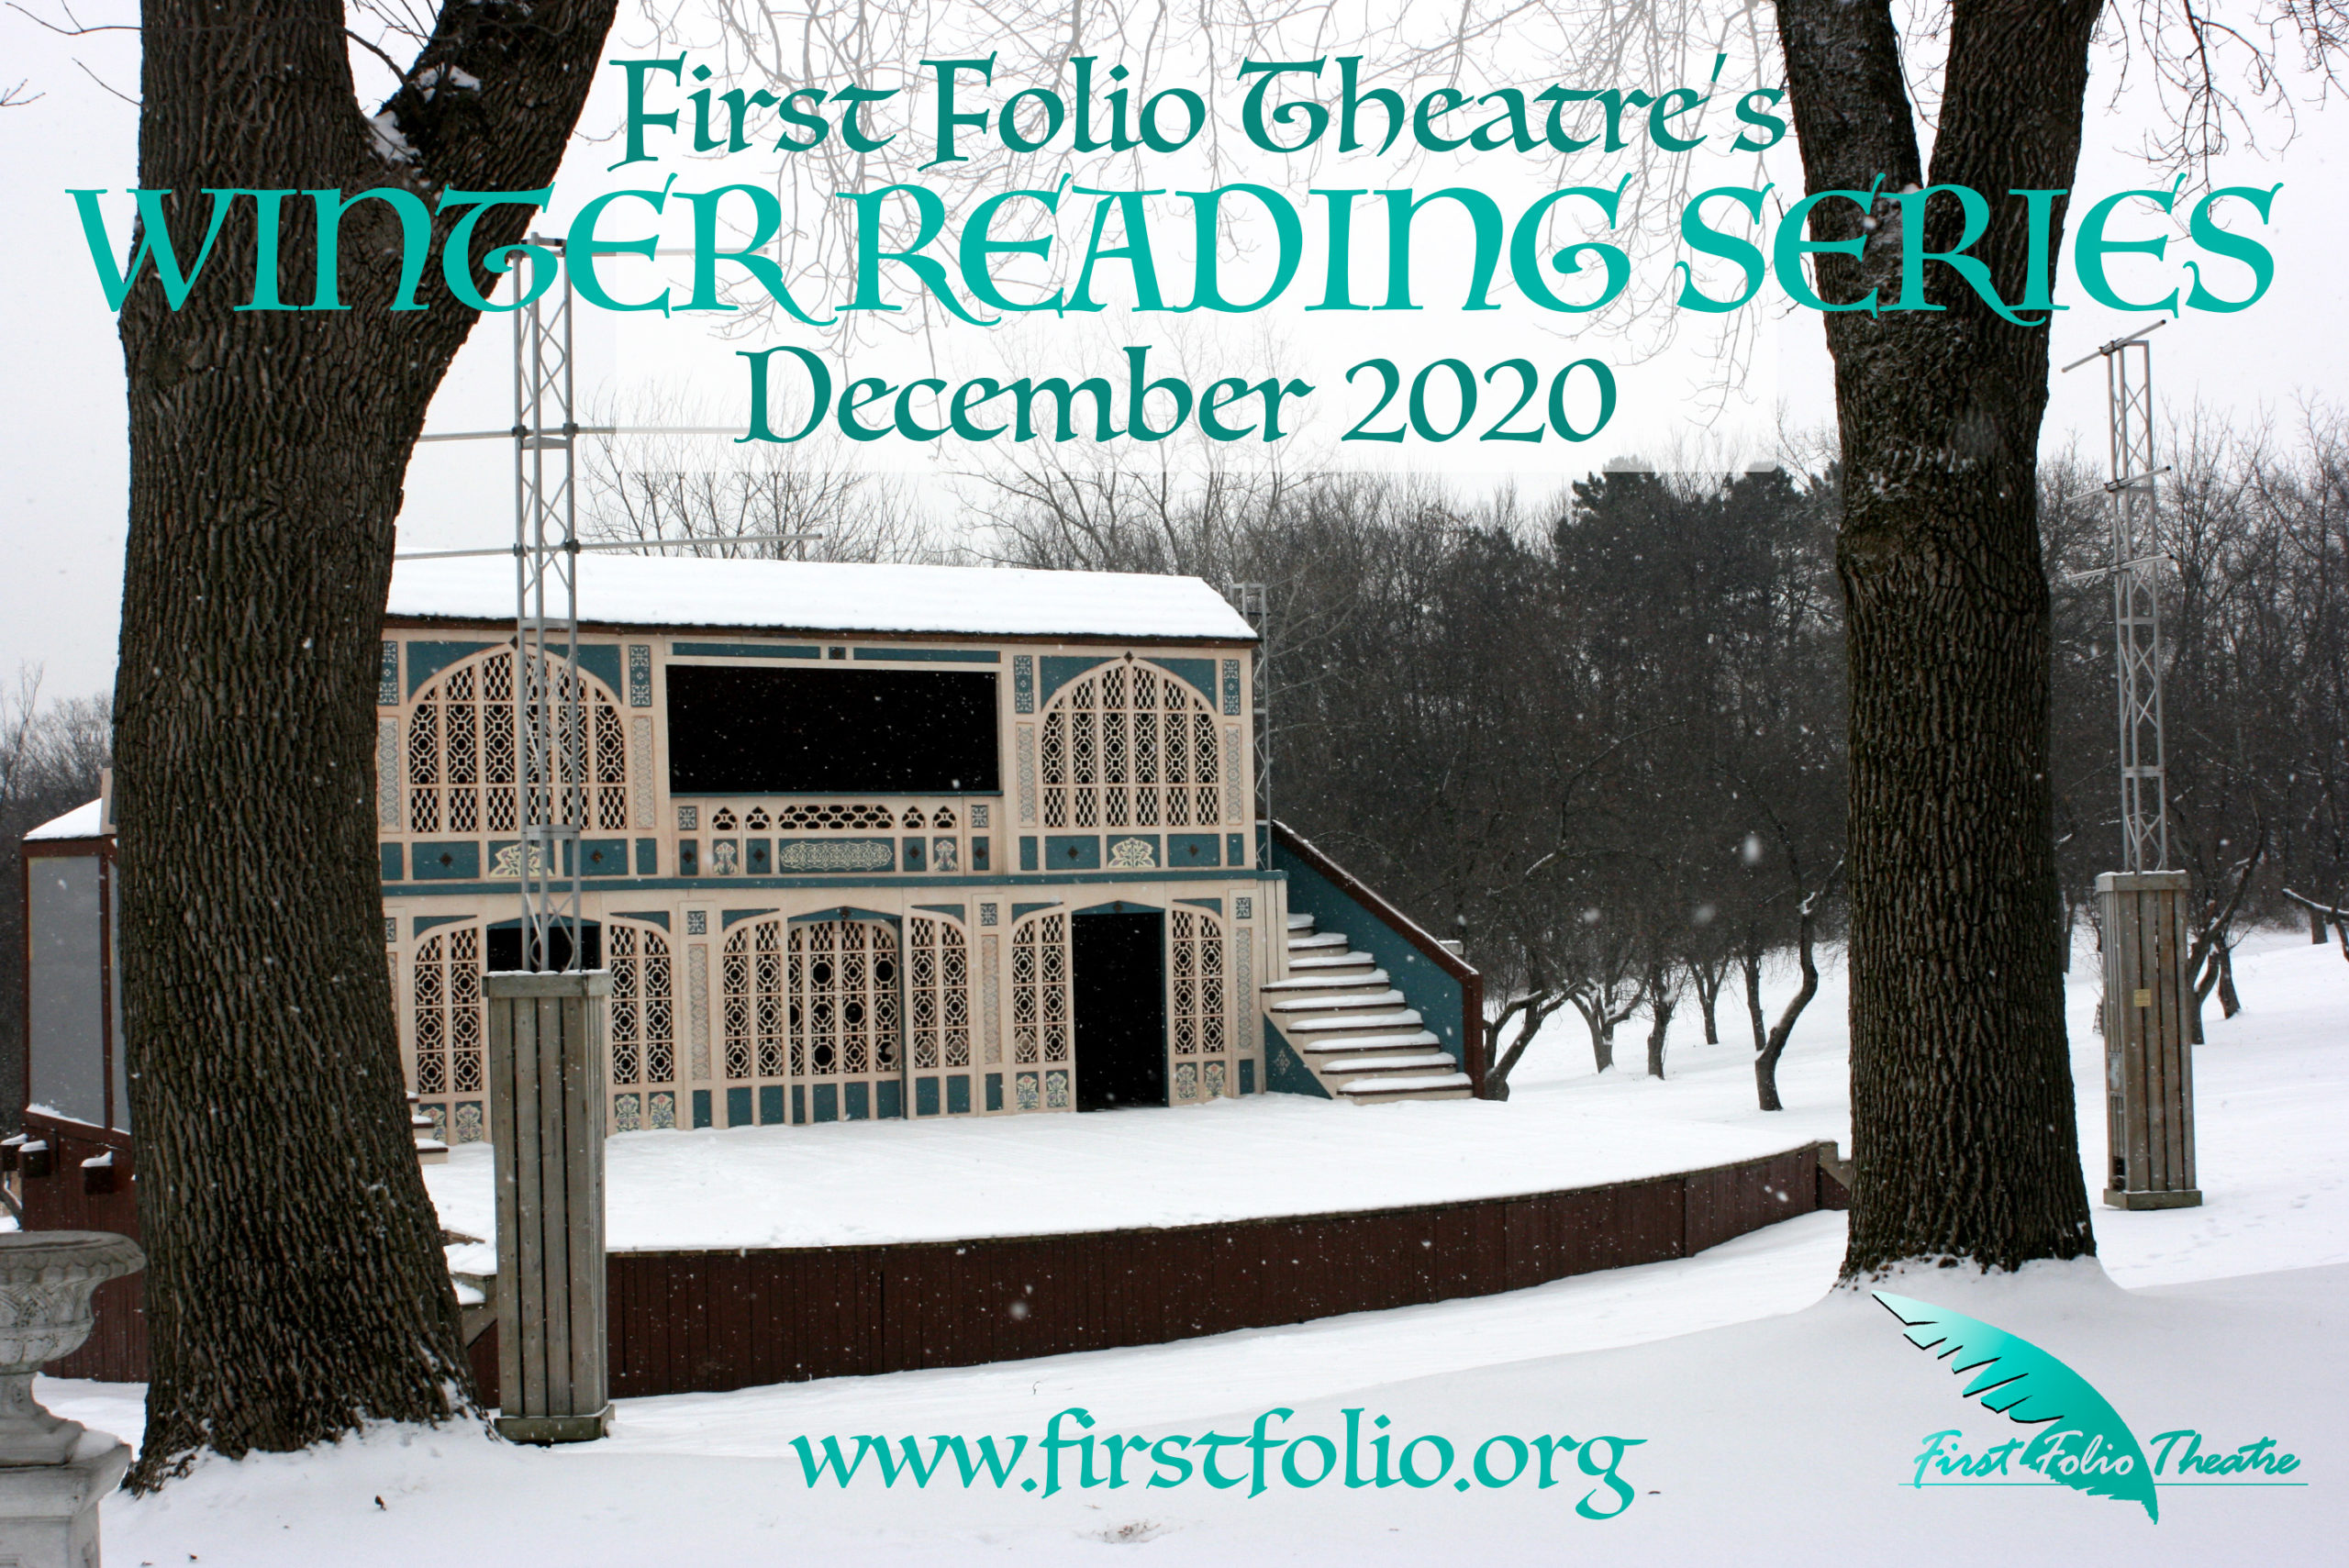 The First Folio outdoor stage in winter, covered in snow and surrounded by bare trees.